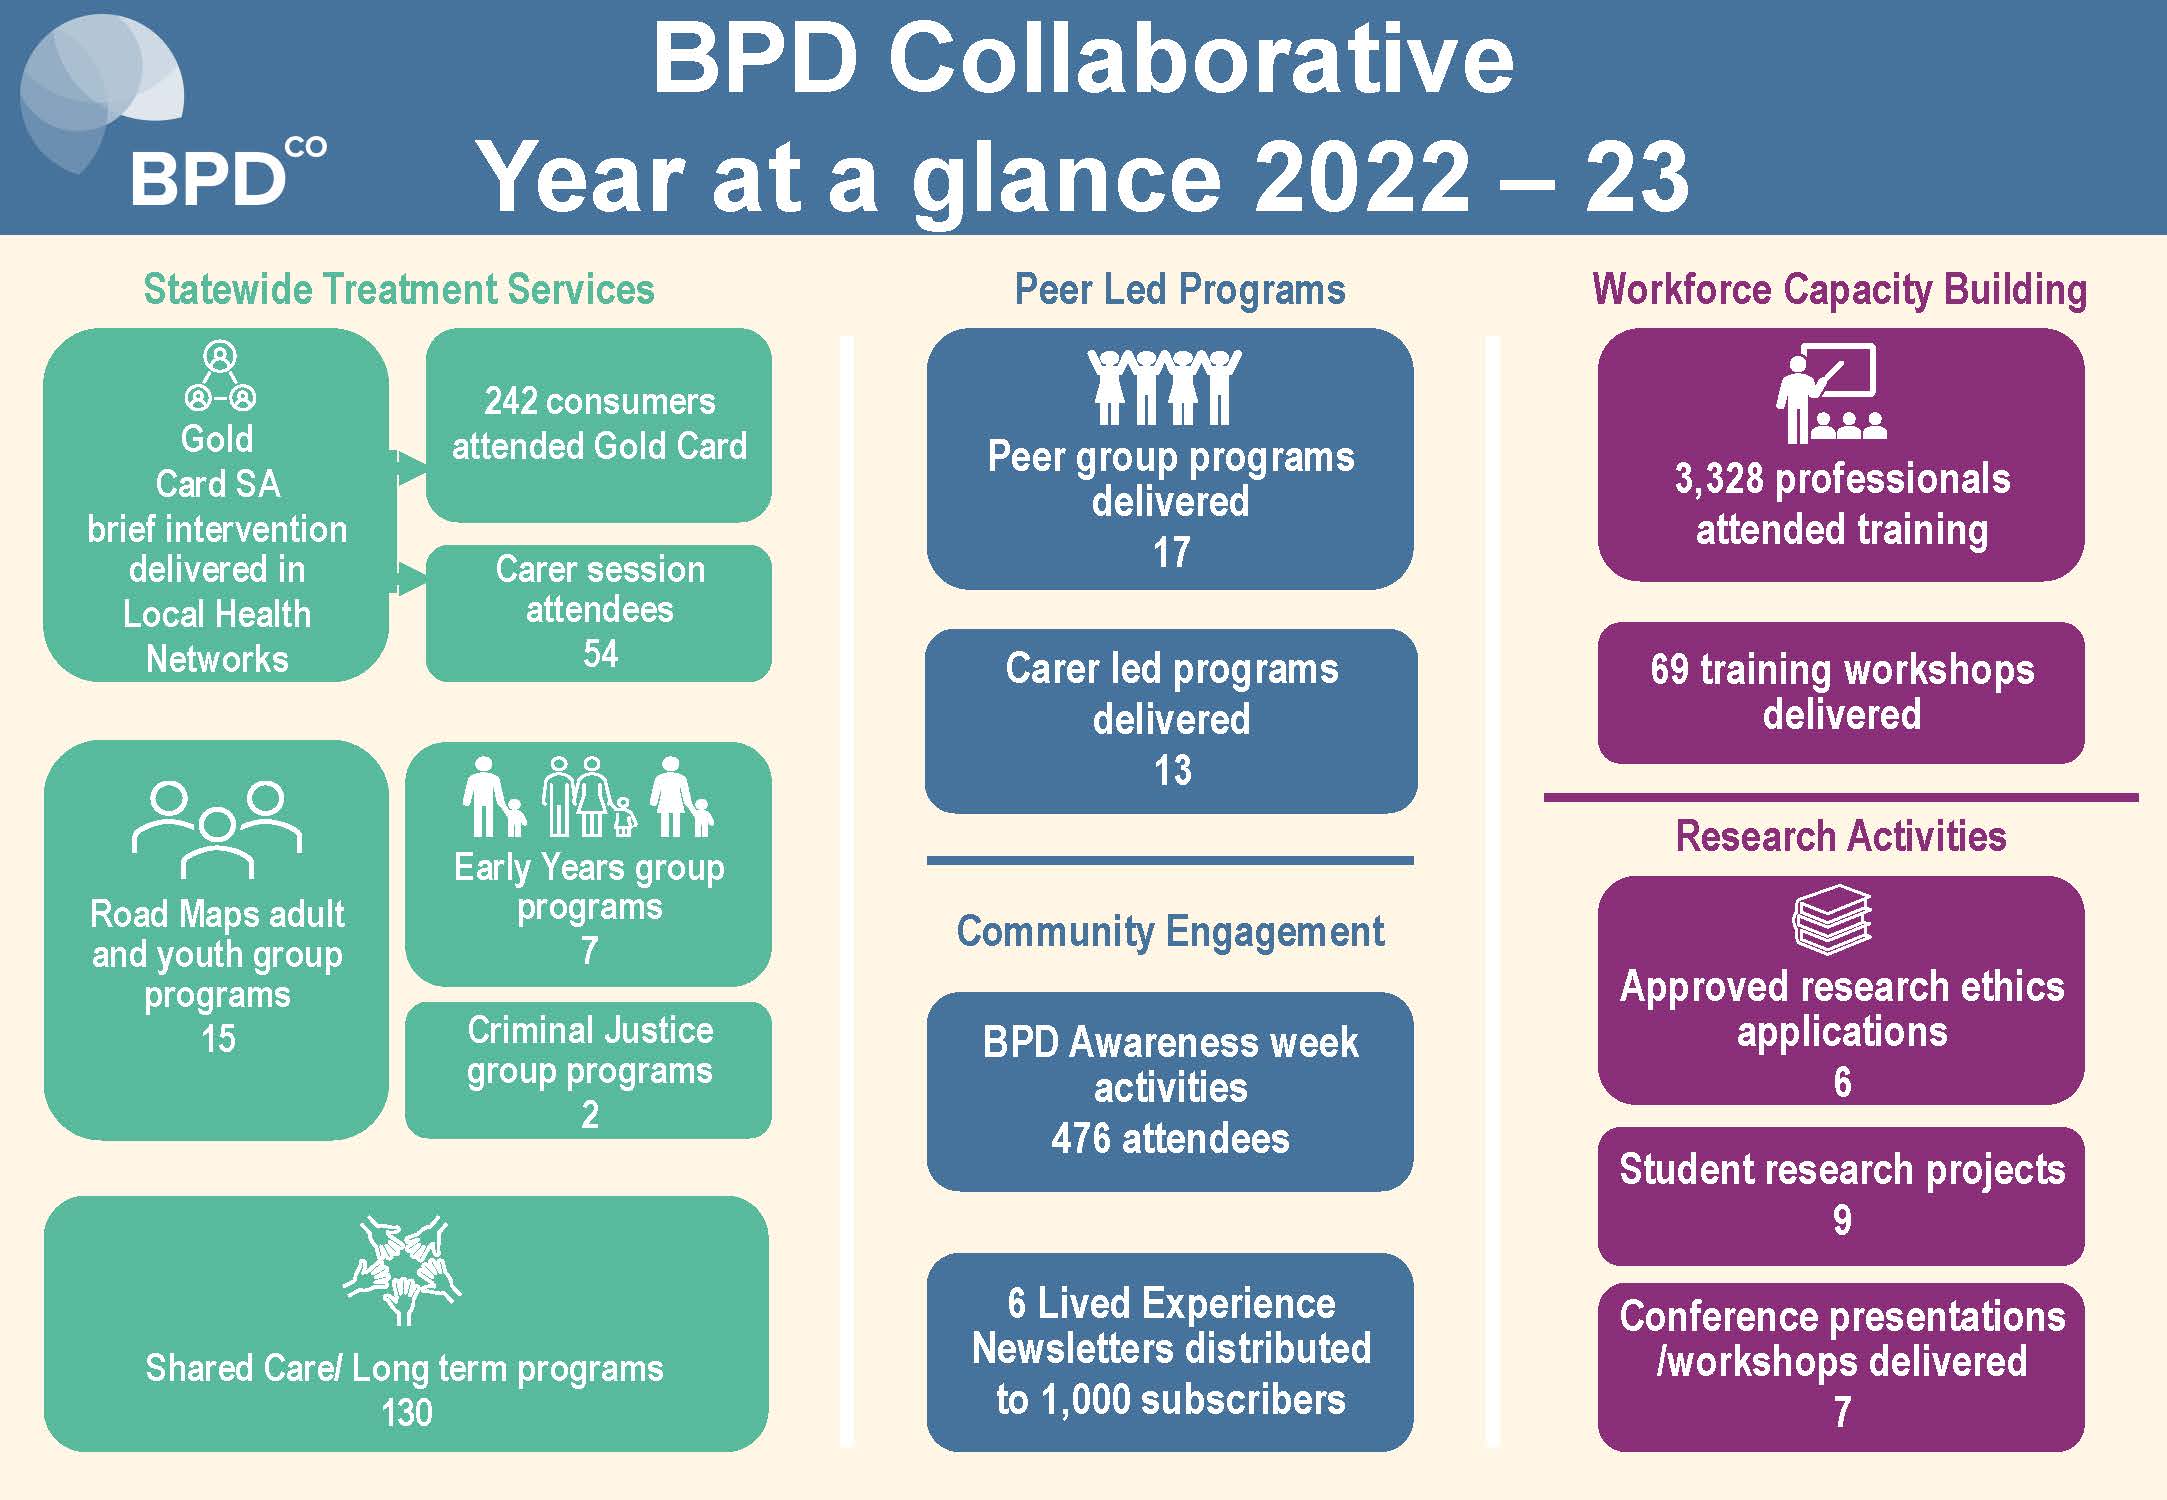 Infographic for BPD Co year at a glance data